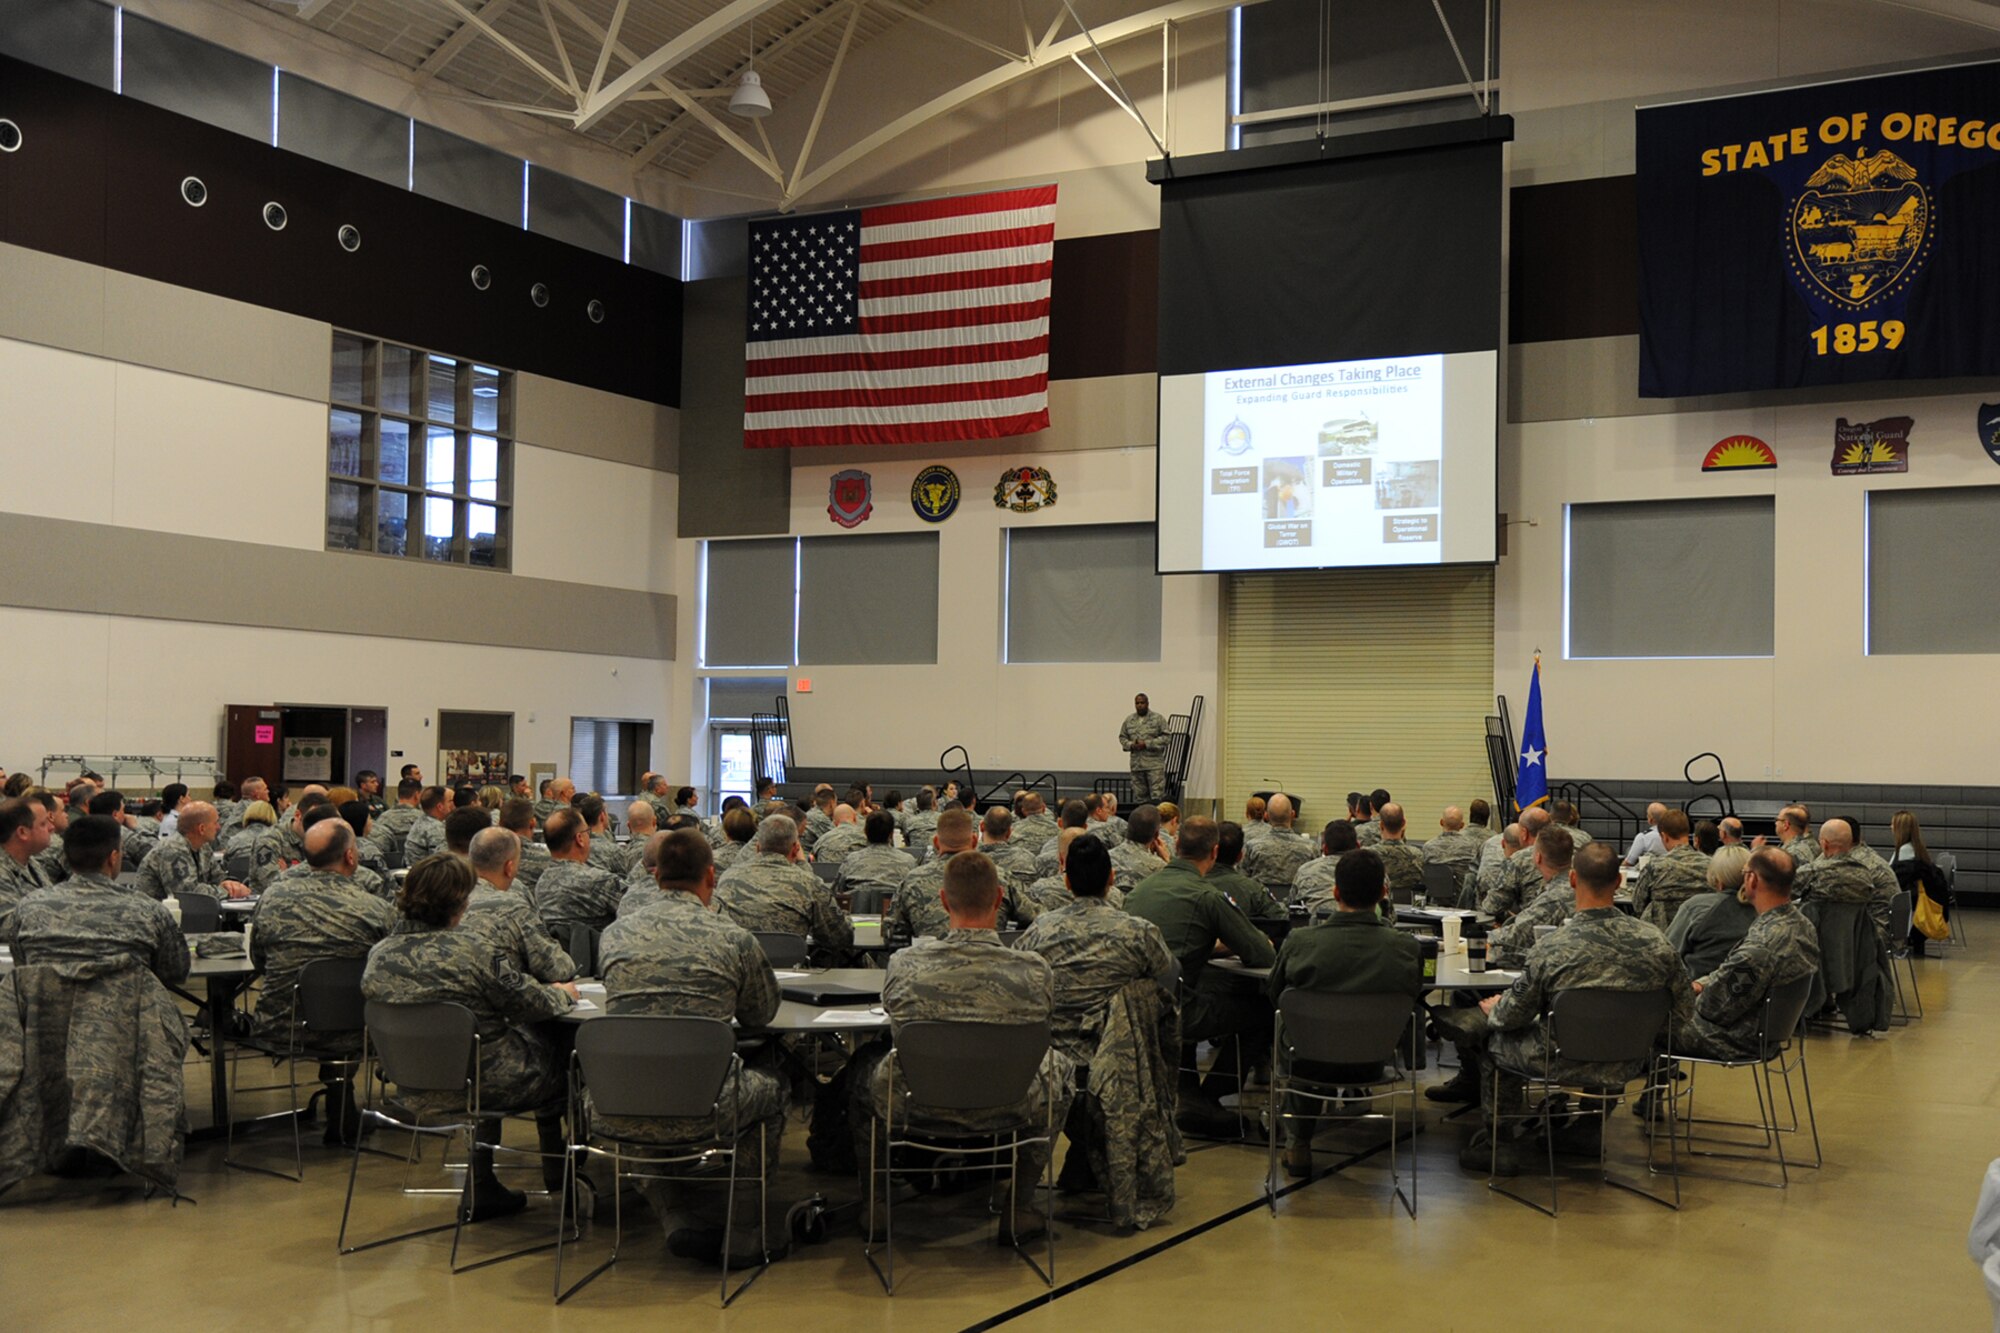 Major General Brian C. Newby, Air National Guard assistant to the Judge Advocate General, addresses members of the Air National Guard during a two-day Contemporary Base Issues (CBI) course held at Camp Withycombe in Clackamas, Oregon, February 19-20, 2016. The CBI course is taught by Air National Guard Judge Advocate Generals and the primary goal is to allow commanders and supervisors to work together as a team to identify, analyze and resolve contemporary problems leaders face. (U.S. Air National Guard photo by Master Sgt. Shelly Davison, 142nd Fighter Wing Public Affairs)